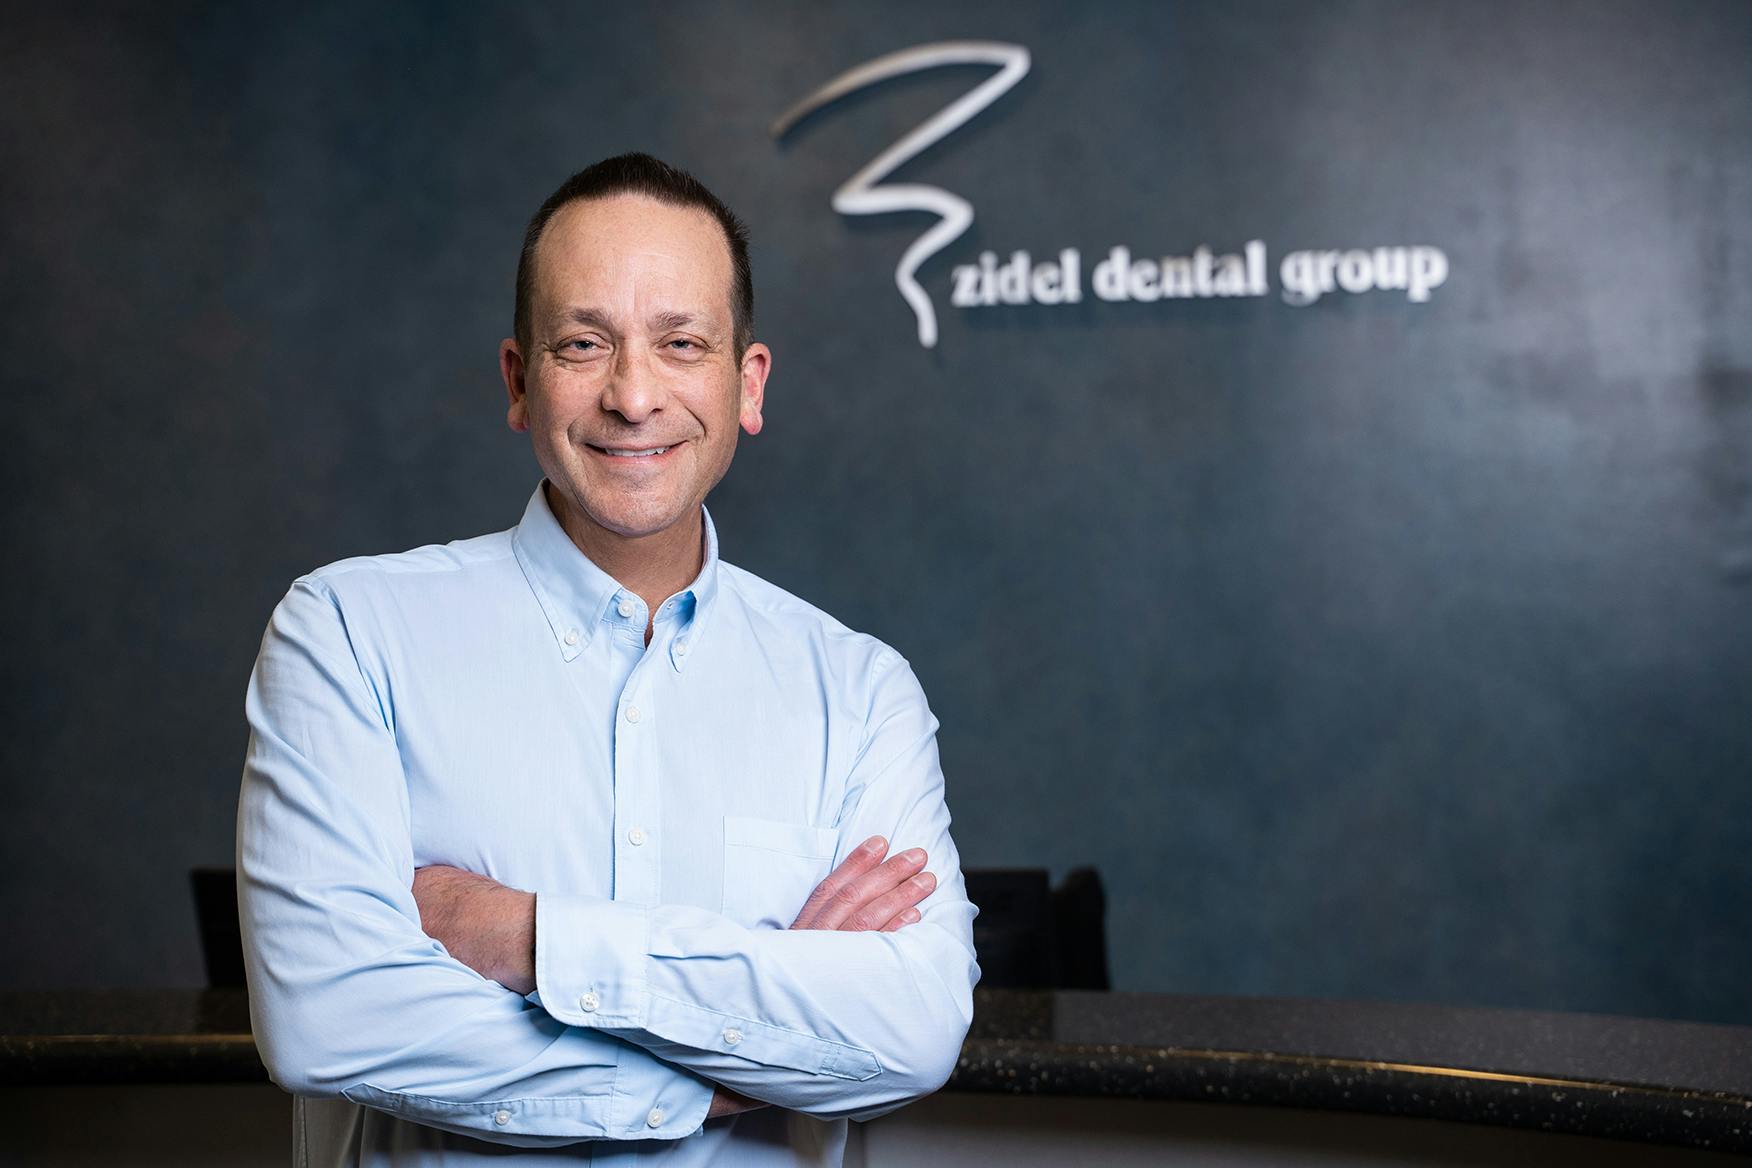 Dr. Eric Zidel, DDS "Dr. Eric" image